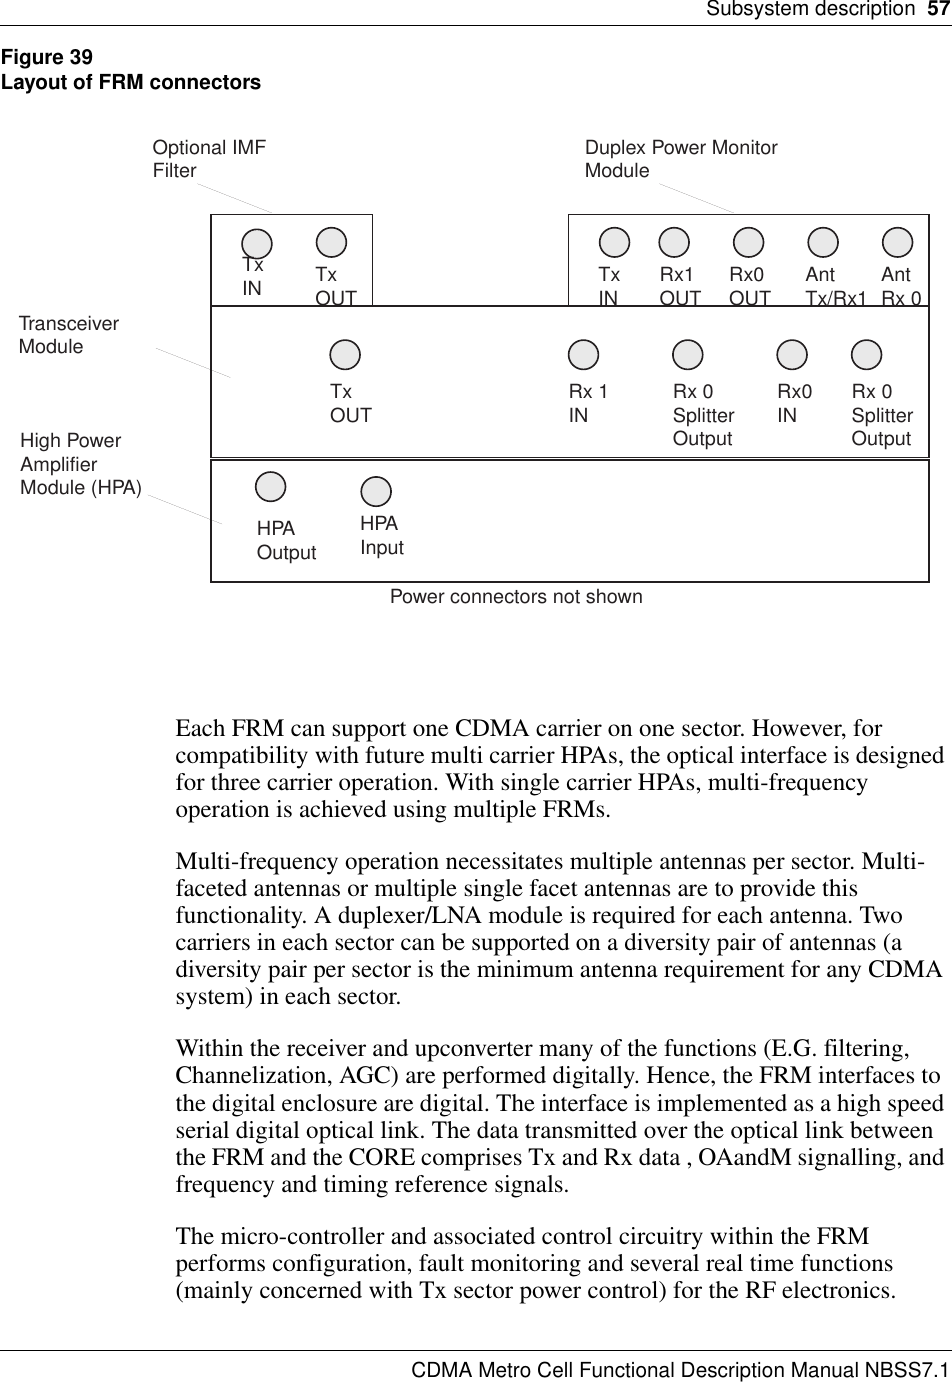 Subsystem description  57CDMA Metro Cell Functional Description Manual NBSS7.1Figure 39Layout of FRM connectorsEach FRM can support one CDMA carrier on one sector. However, for compatibility with future multi carrier HPAs, the optical interface is designed for three carrier operation. With single carrier HPAs, multi-frequency operation is achieved using multiple FRMs.Multi-frequency operation necessitates multiple antennas per sector. Multi-faceted antennas or multiple single facet antennas are to provide this functionality. A duplexer/LNA module is required for each antenna. Two carriers in each sector can be supported on a diversity pair of antennas (a diversity pair per sector is the minimum antenna requirement for any CDMA system) in each sector.Within the receiver and upconverter many of the functions (E.G. filtering, Channelization, AGC) are performed digitally. Hence, the FRM interfaces to the digital enclosure are digital. The interface is implemented as a high speed serial digital optical link. The data transmitted over the optical link between the FRM and the CORE comprises Tx and Rx data , OAandM signalling, and frequency and timing reference signals.The micro-controller and associated control circuitry within the FRM performs configuration, fault monitoring and several real time functions (mainly concerned with Tx sector power control) for the RF electronics.TxIN TxINTxOUTTxOUTRx1OUT Rx0OUT AntTx/Rx1  AntRx 0Rx 1IN Rx 0SplitterOutputRx 0SplitterOutputRx0INHPAOutputHPAInputPower connectors not shownTransceiverModuleHigh PowerAmplifierModule (HPA)Optional IMFFilter Duplex Power MonitorModule